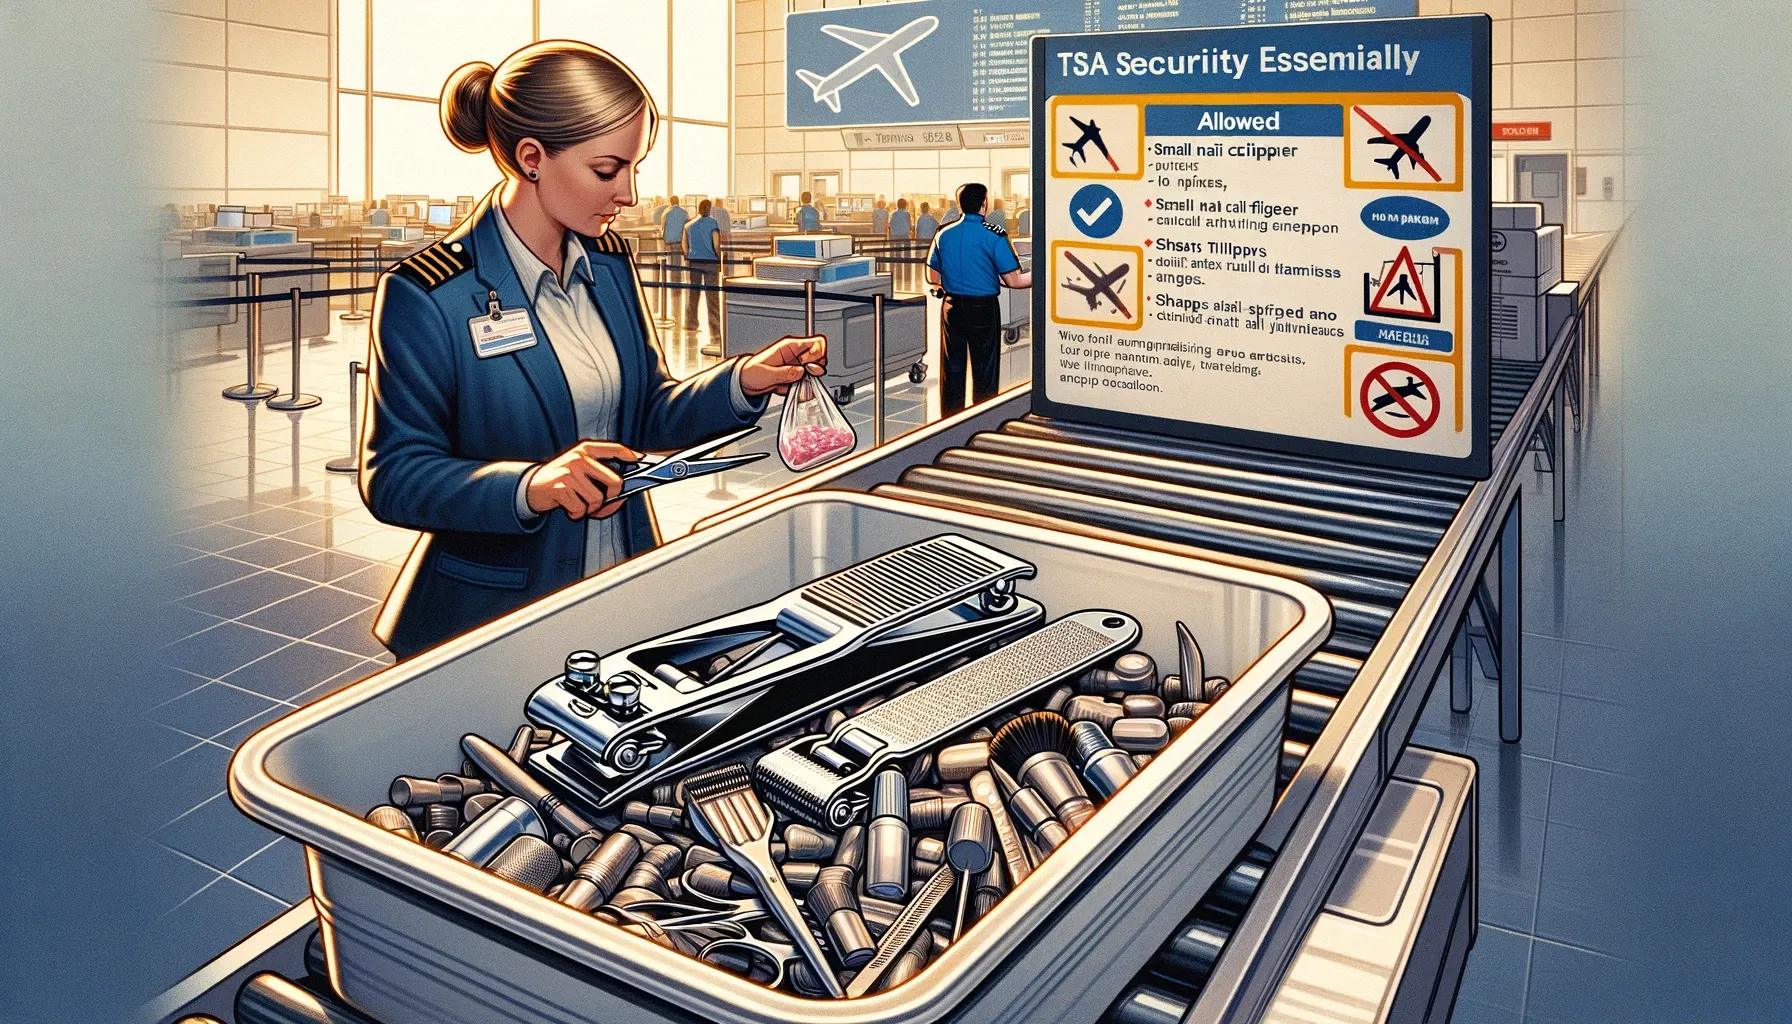 Can I Bring Nail Clippers on a Plane? Demystifying TSA Rules